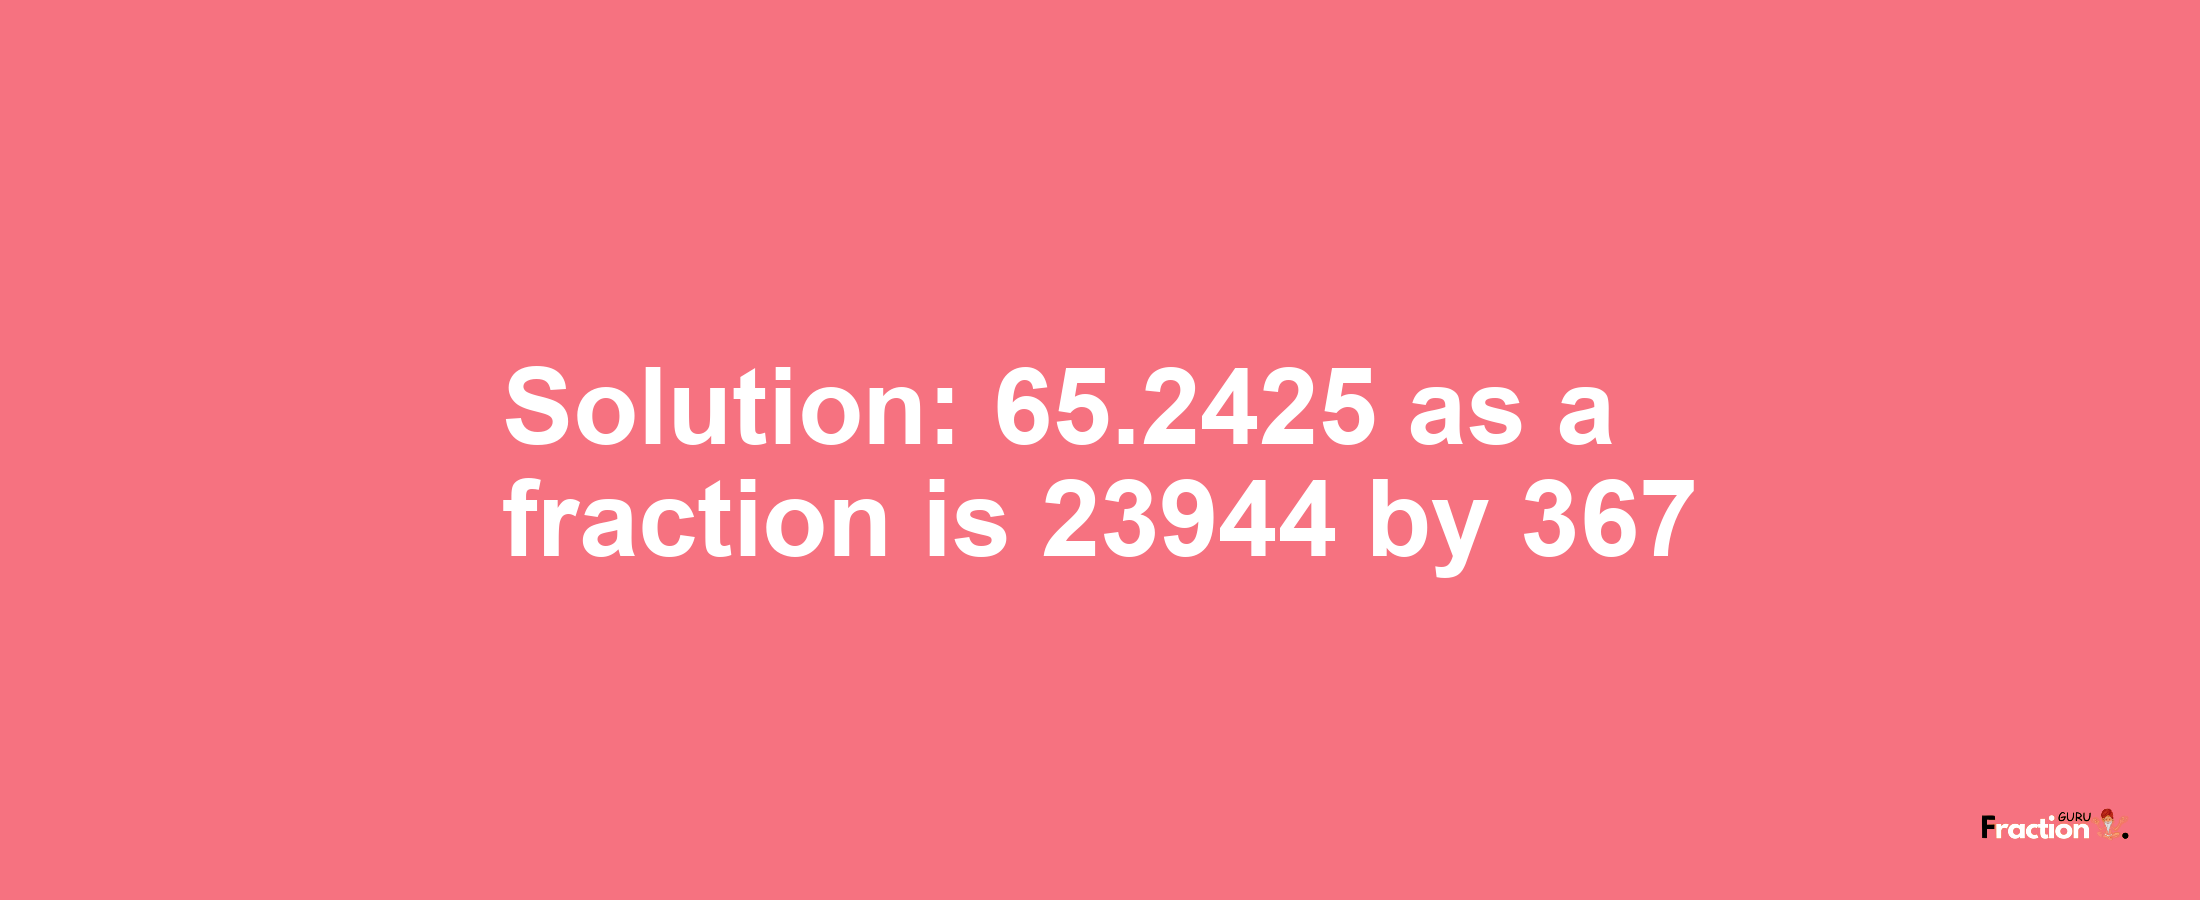 Solution:65.2425 as a fraction is 23944/367